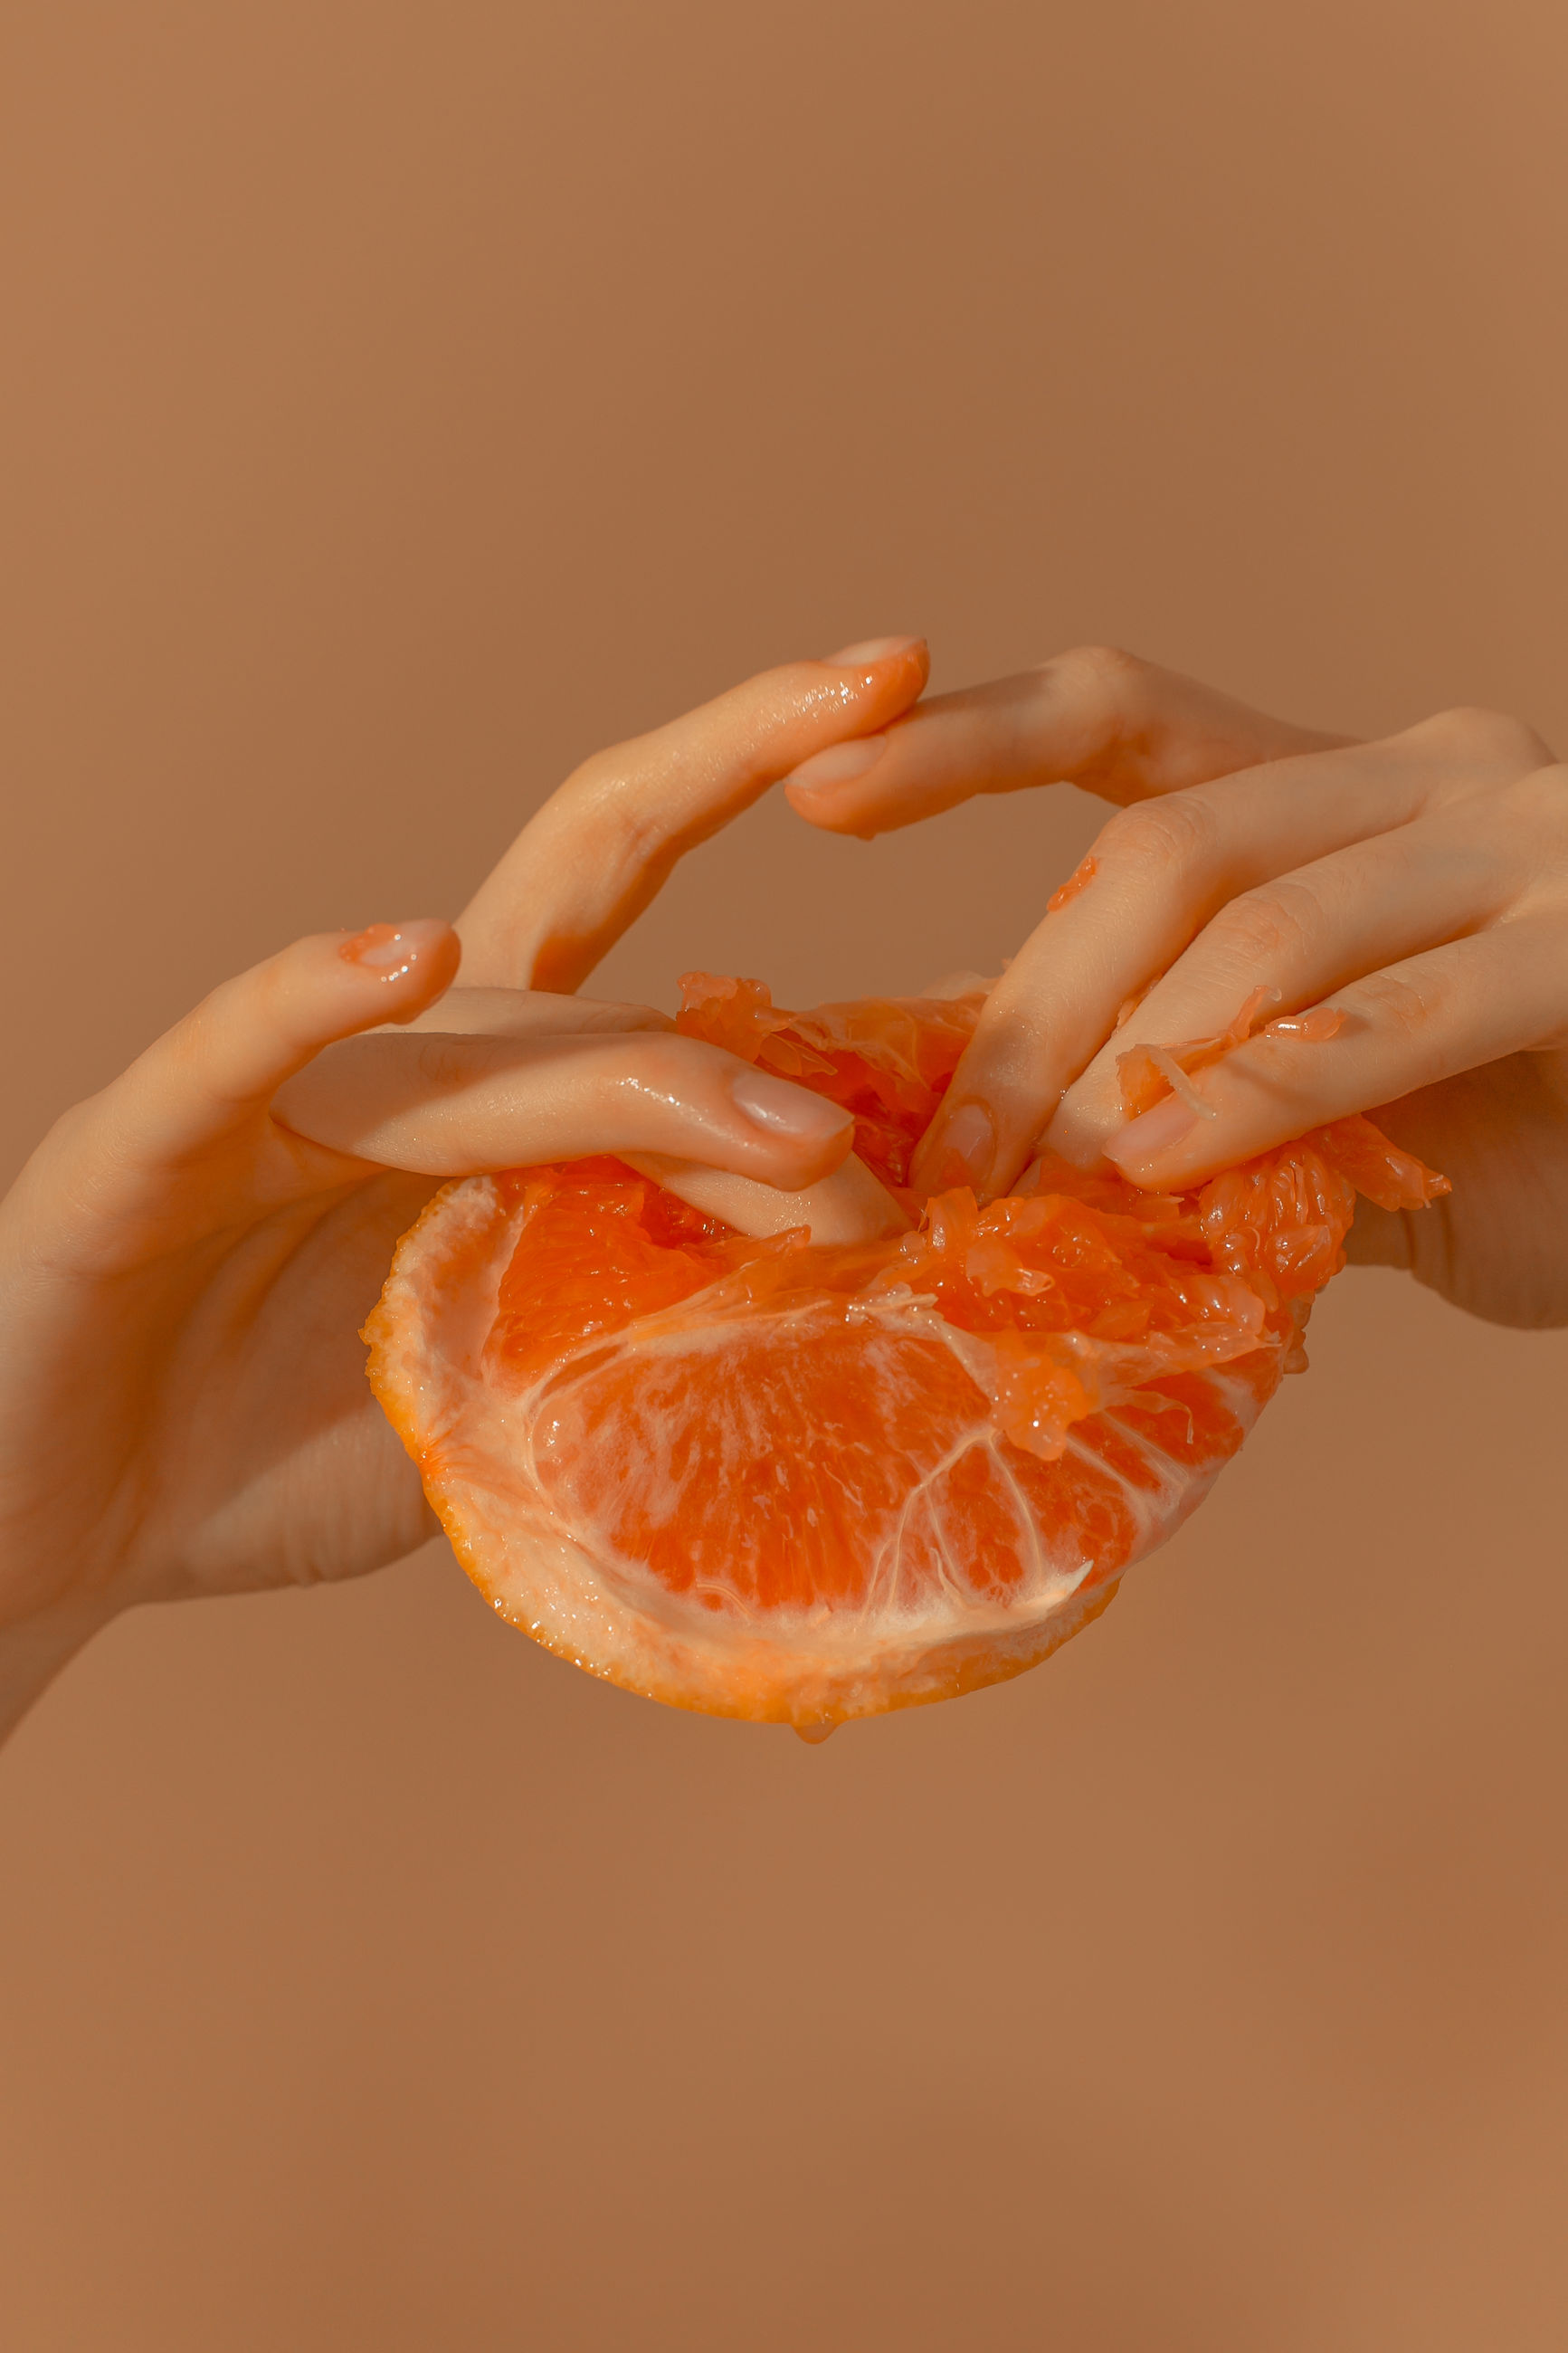 orange color, food, human hand, food and drink, human body part, indoors, holding, freshness, hand, healthy eating, fruit, one person, wellbeing, studio shot, citrus fruit, close-up, orange, body part, orange - fruit, finger, orange background